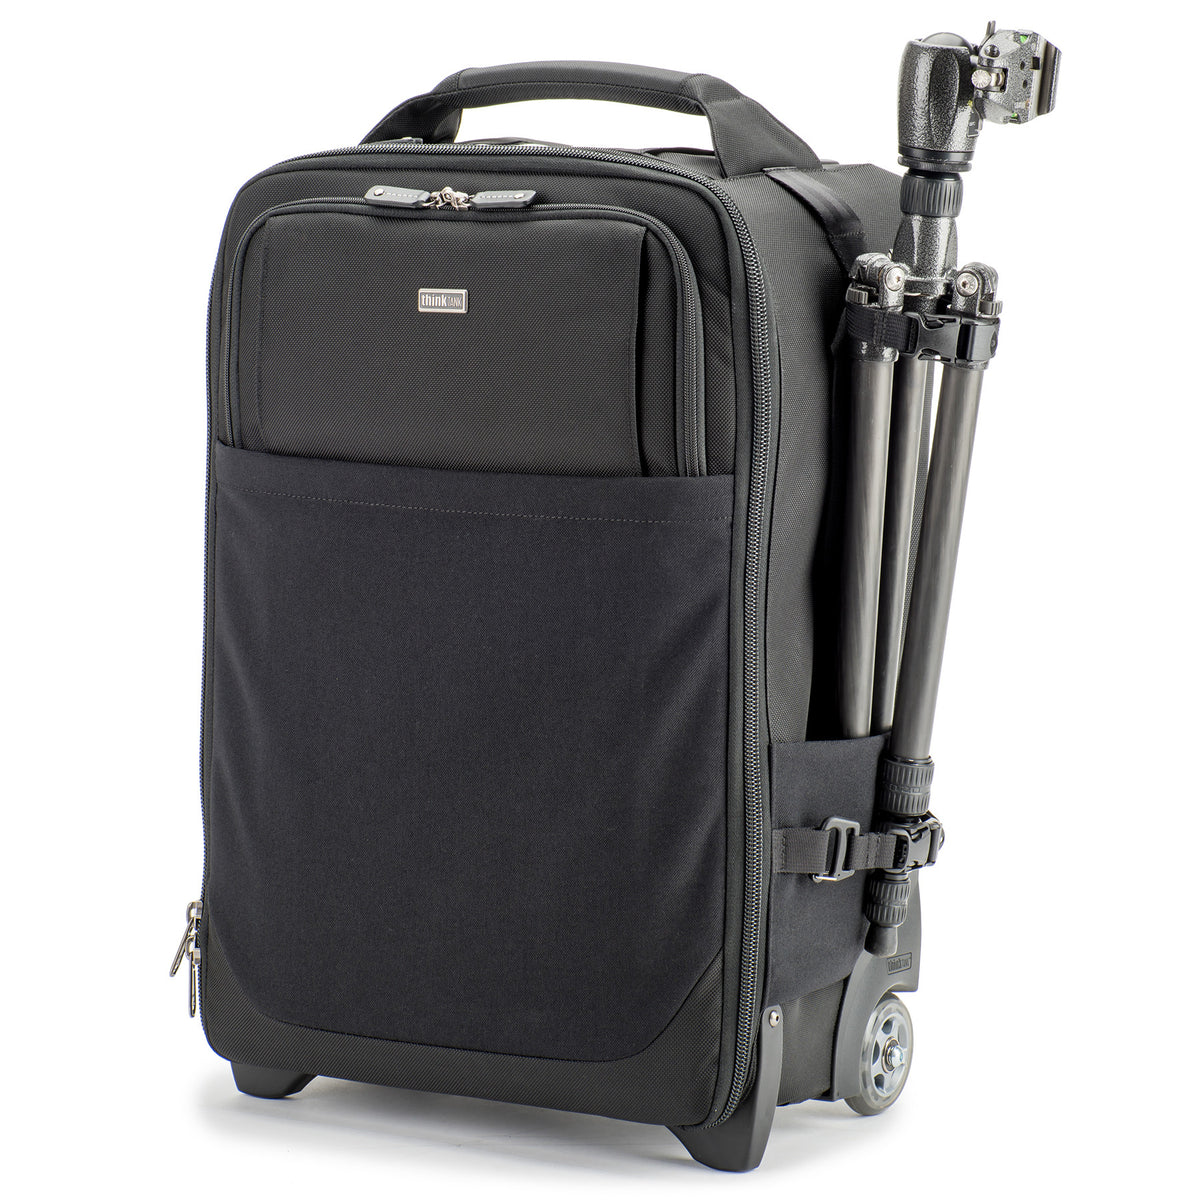 Airport Security™ V3.0 Best Rolling Camera Bag for Airlines